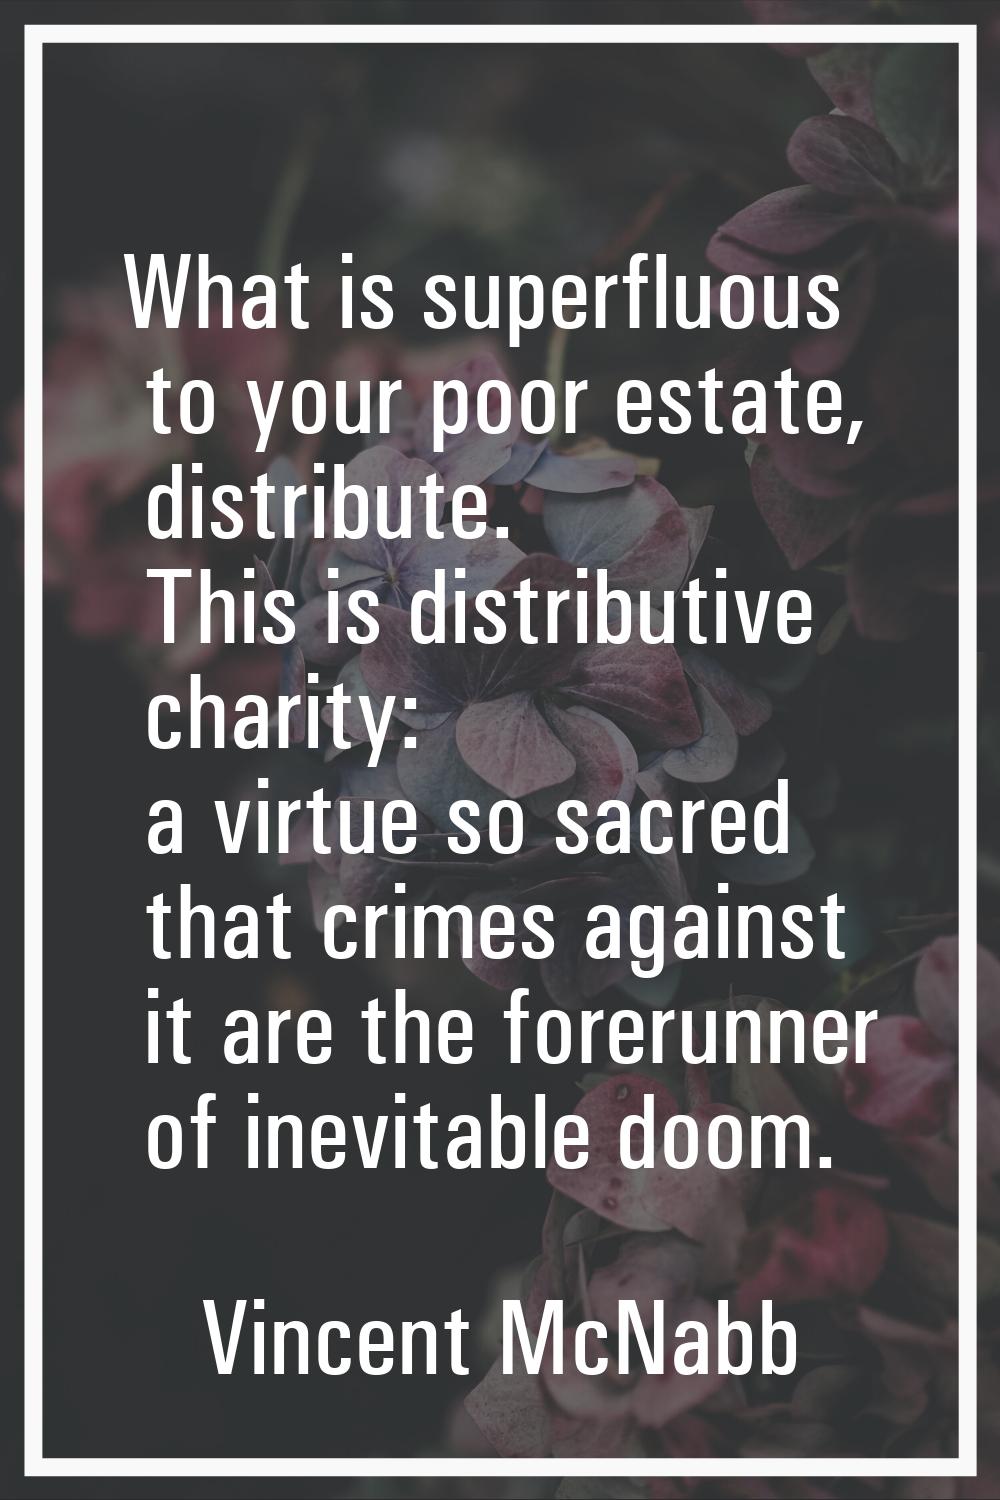 What is superfluous to your poor estate, distribute. This is distributive charity: a virtue so sacr